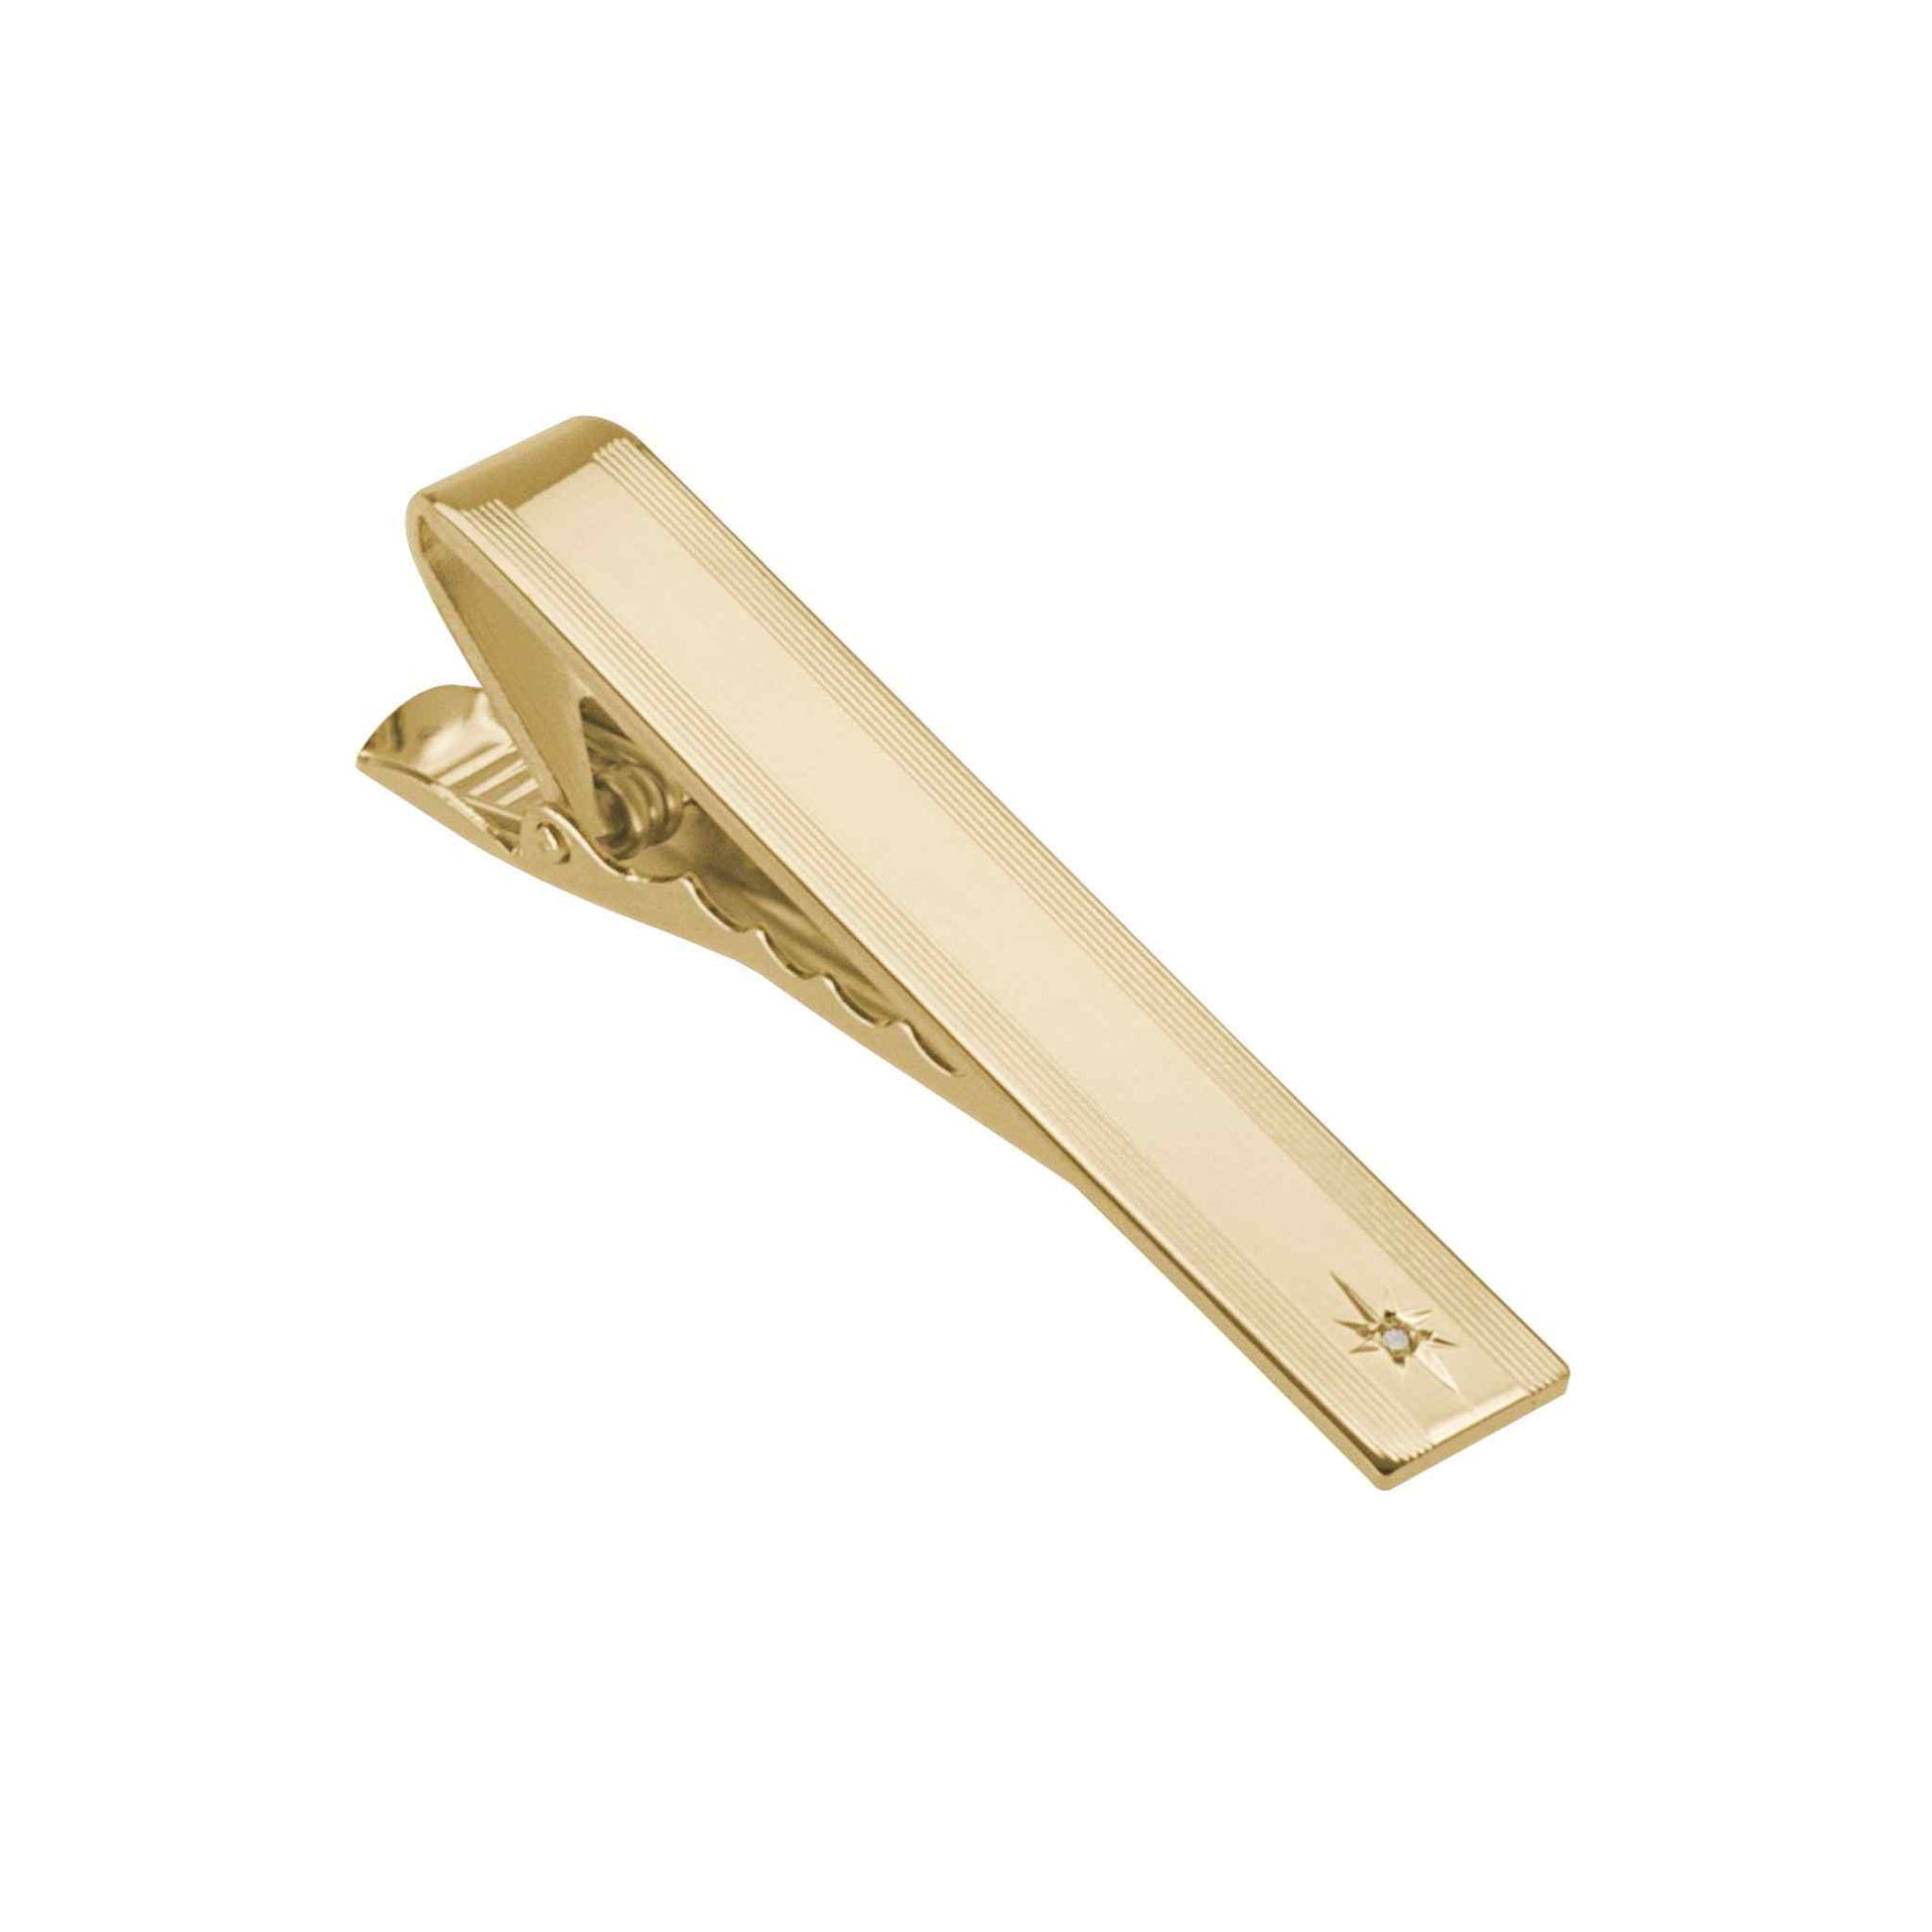 A star cut tie bar with .01ctw genuine diamond displayed on a neutral white background.